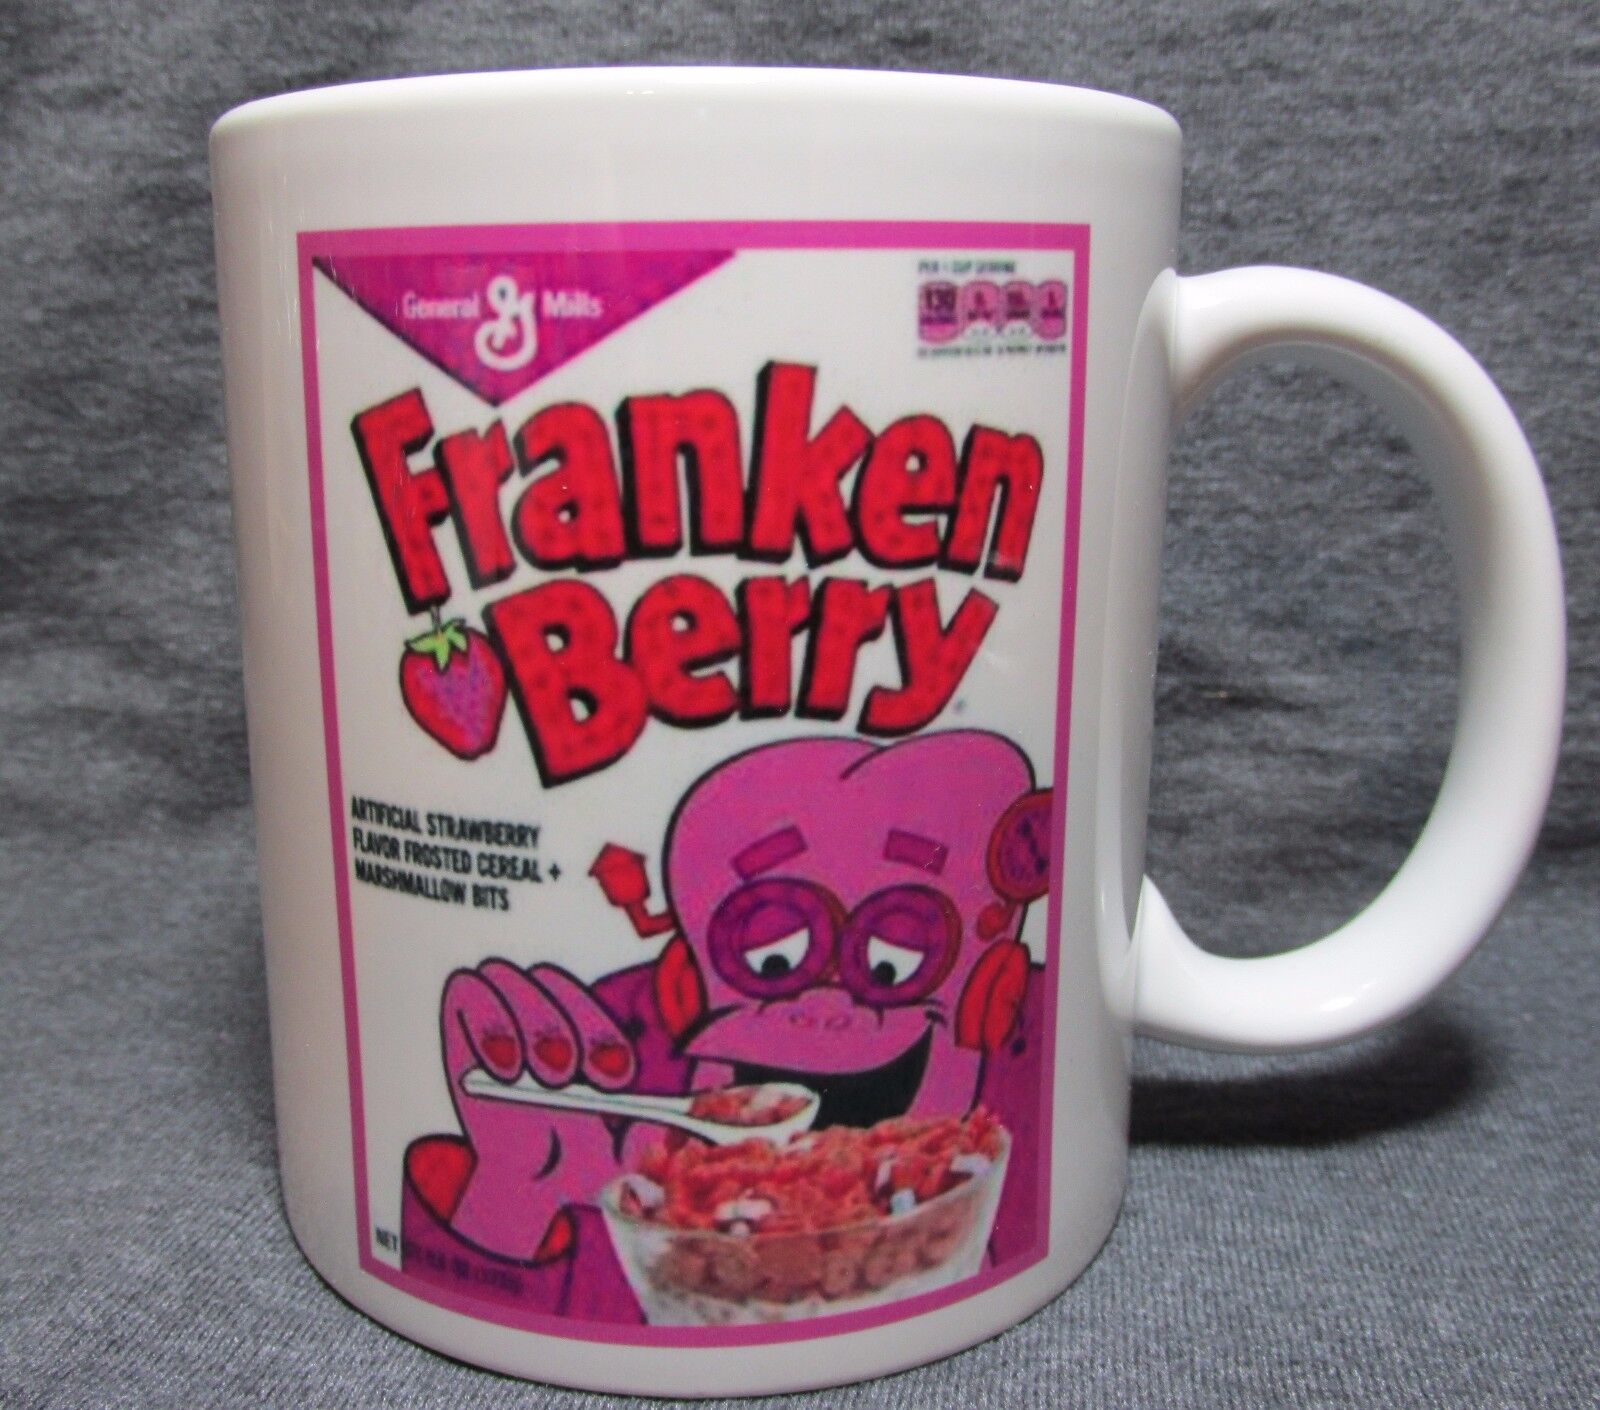 Franken Berry Cereal Box Coffee Cup, Mug - GM Classic - Sharp - COLLECT THE SET